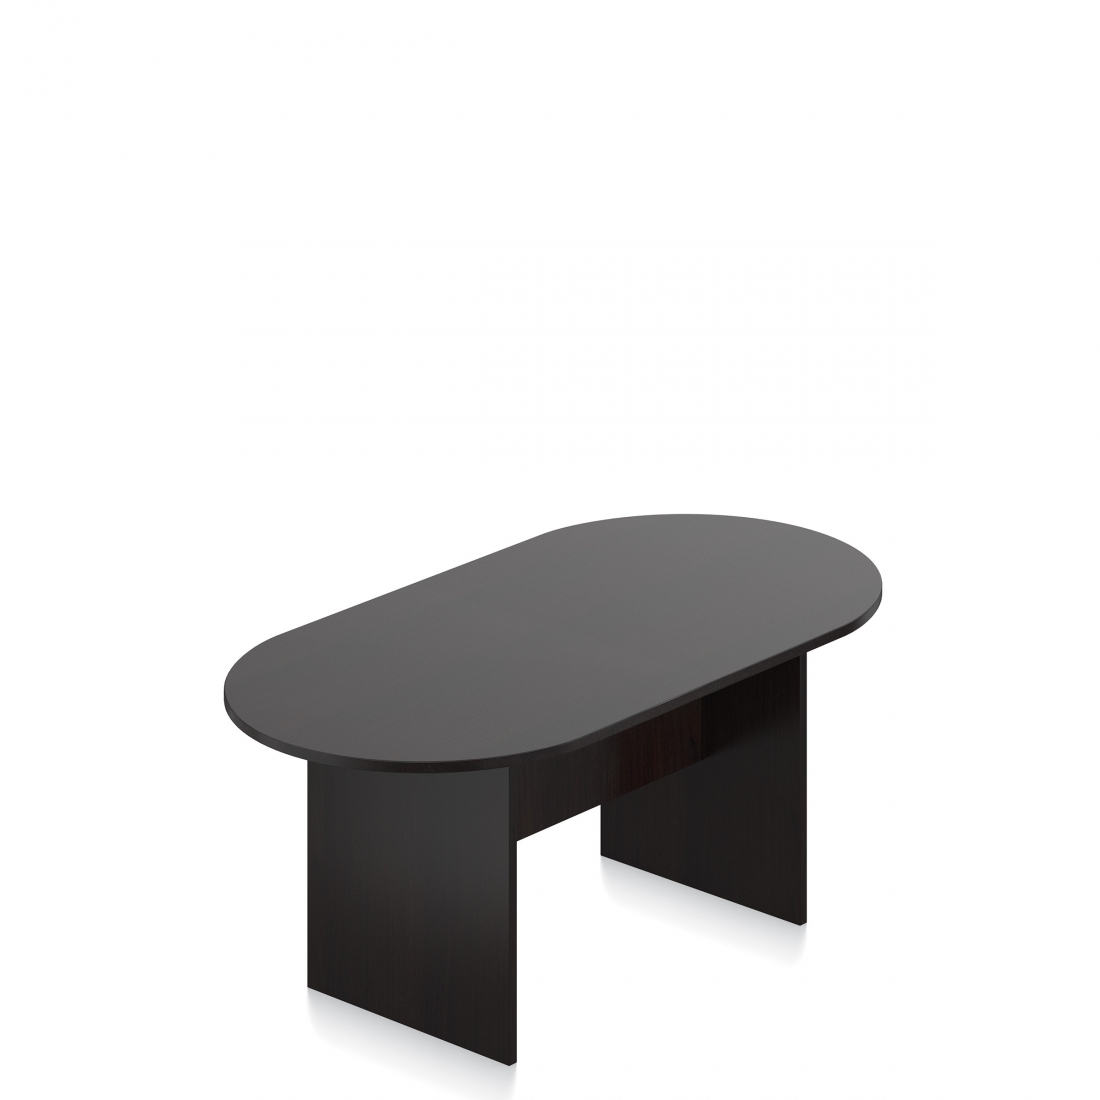 71” Racetrack Conference Table